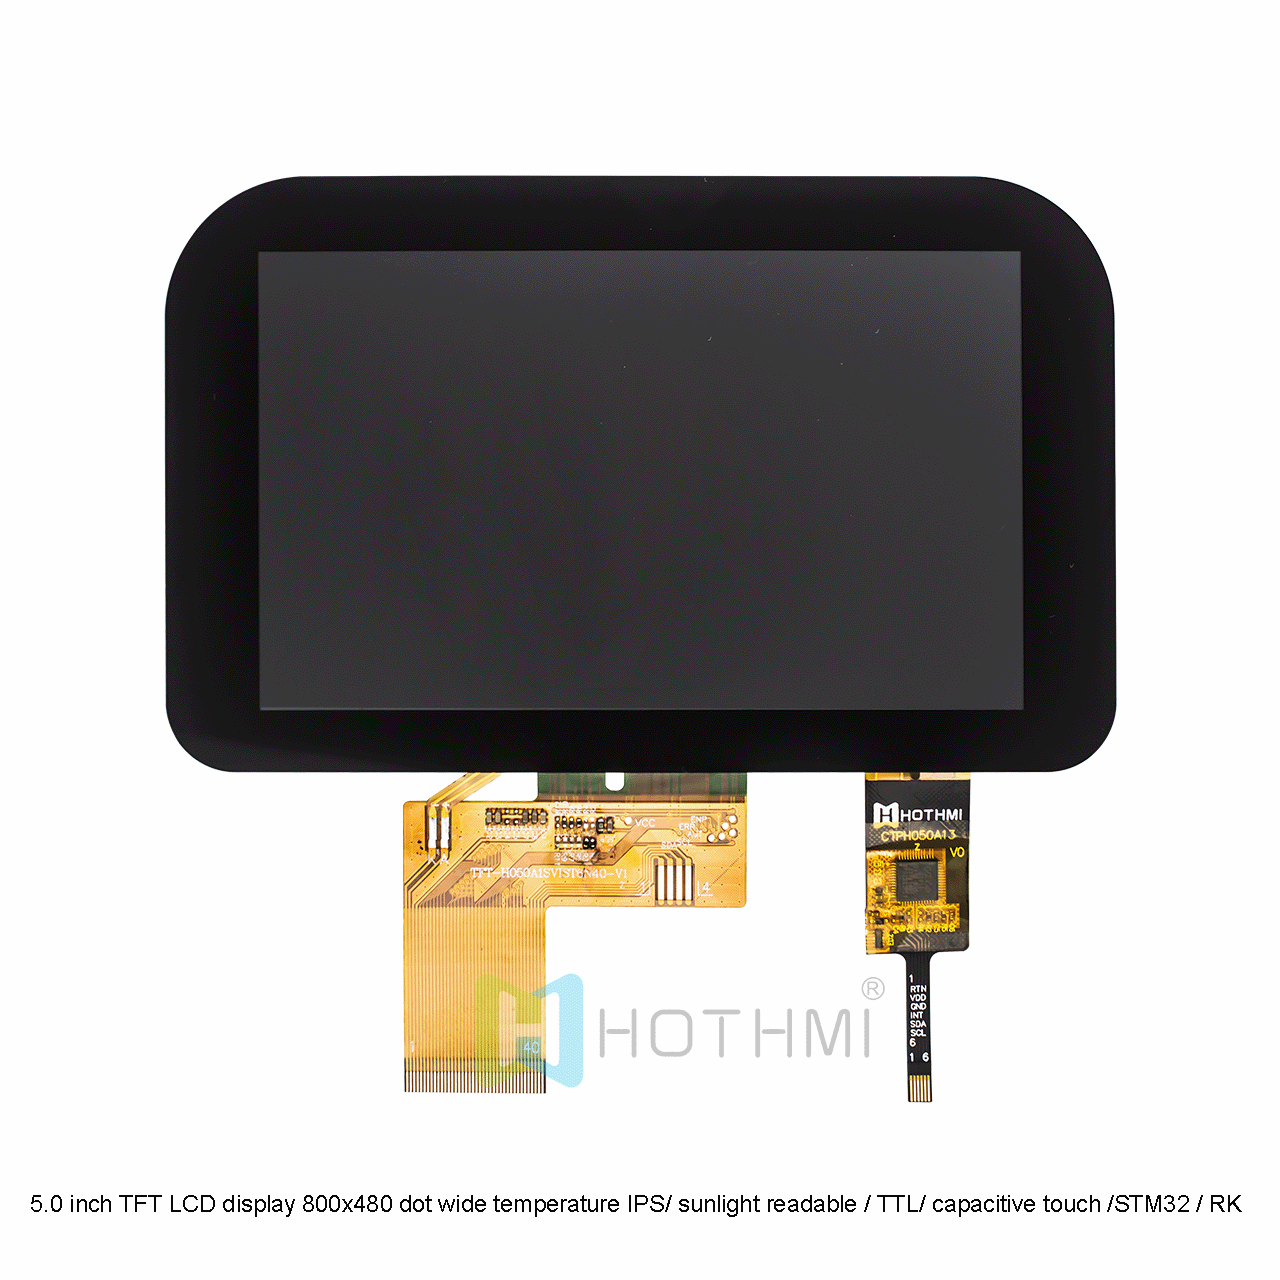 5.0 inch TFT LCD display 800x480 dot matrix wide temperature IPS full viewing angle / sunlight readable / TTL interface / capacitive touch / compatible with STM32 / RK